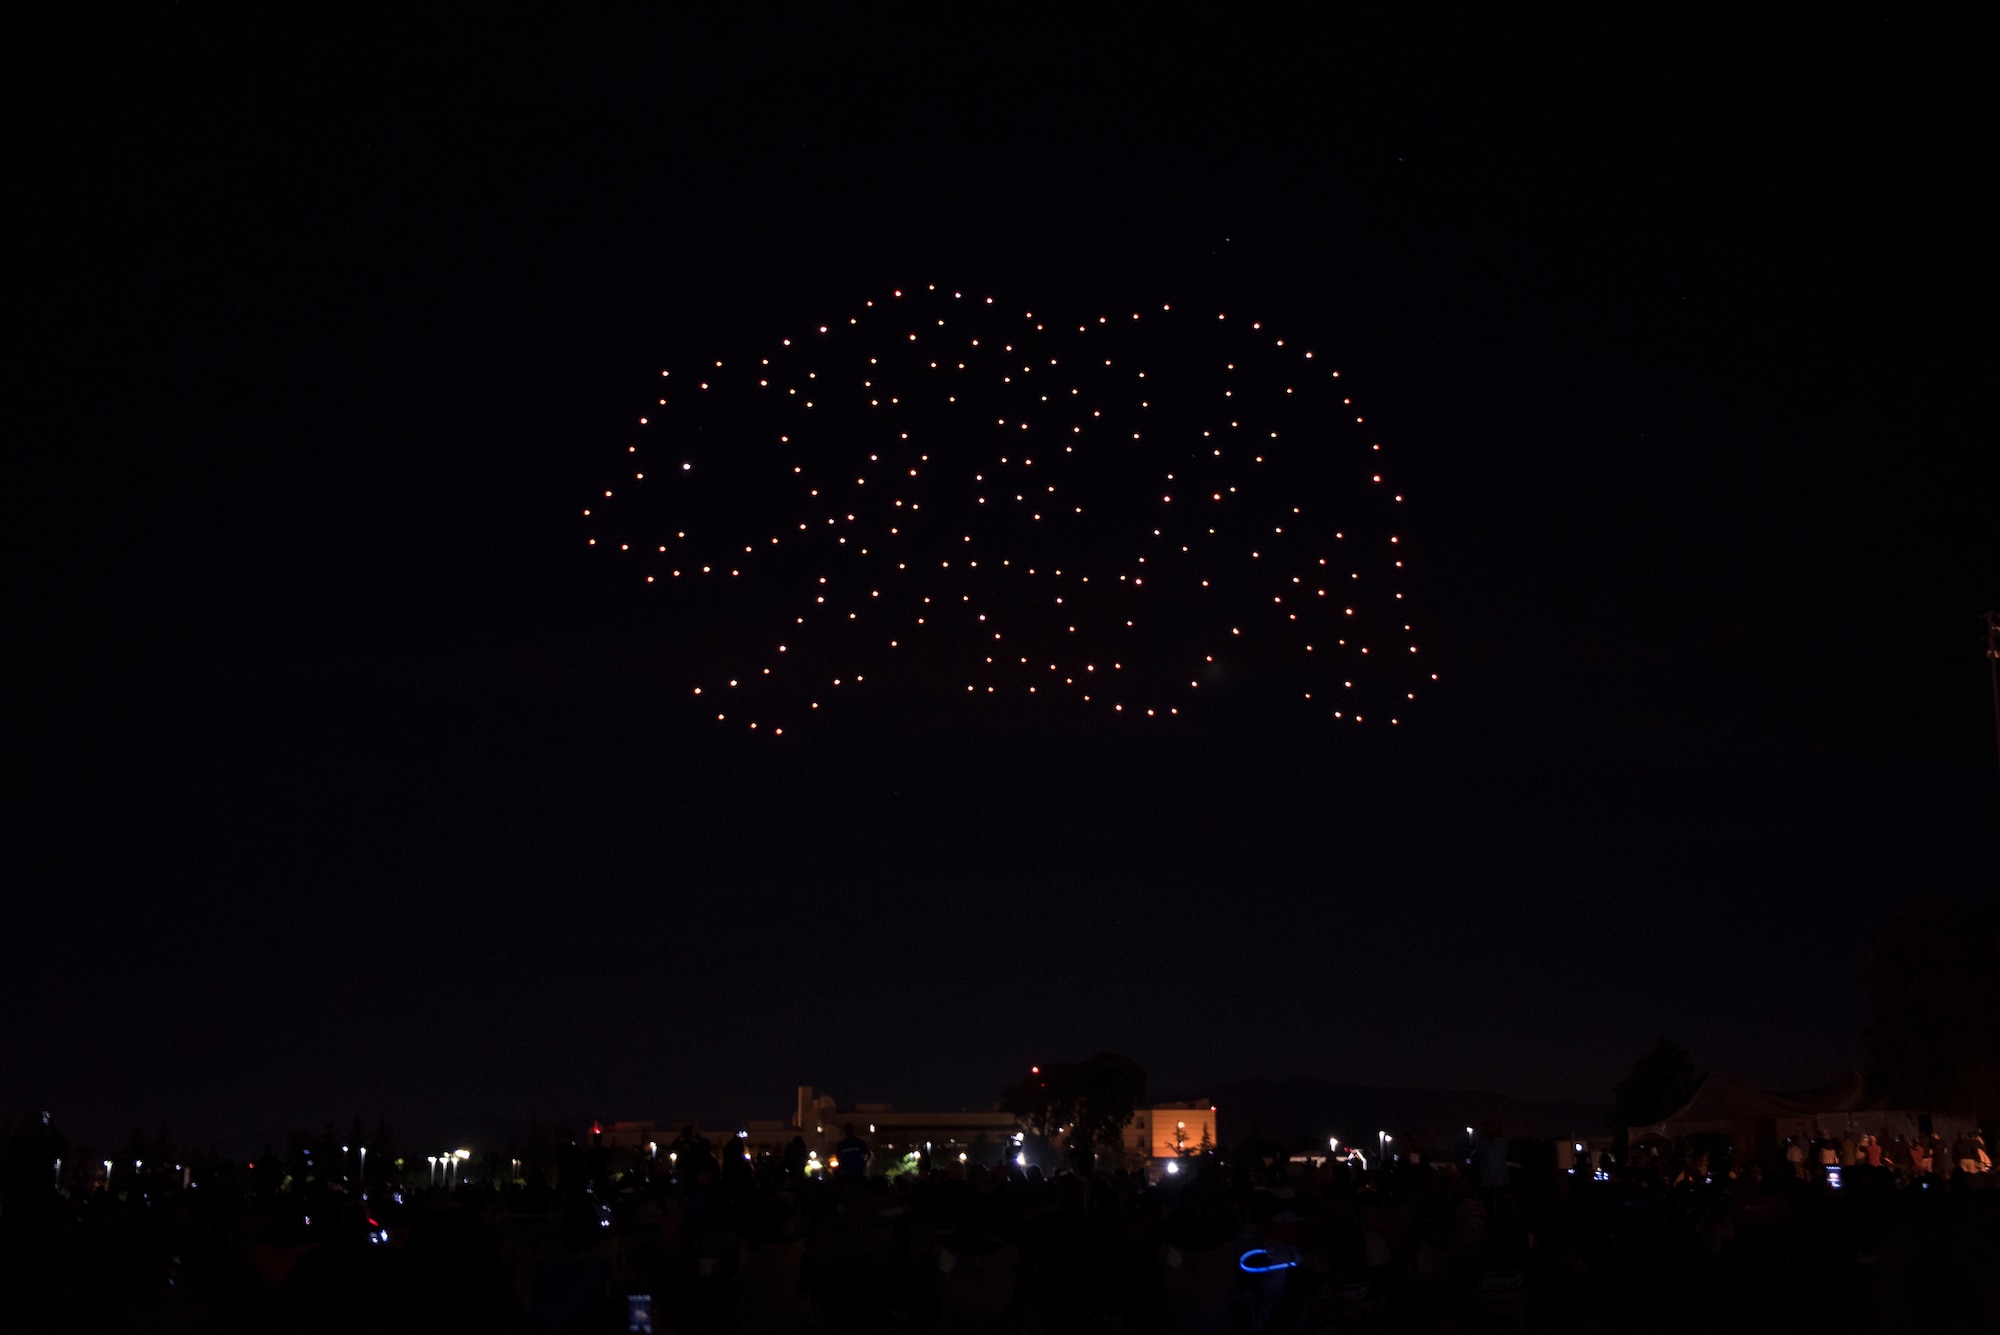 Hundreds of drones form the California Bear over Travis Air Force Base, Calif., July 5, 2018 during an Intel drone light show. The event featured numerous activities including music, bounce houses and an eight minute light show with 500 drones. (U.S. Air Force photo by Tech. Sgt. James Hodgman)